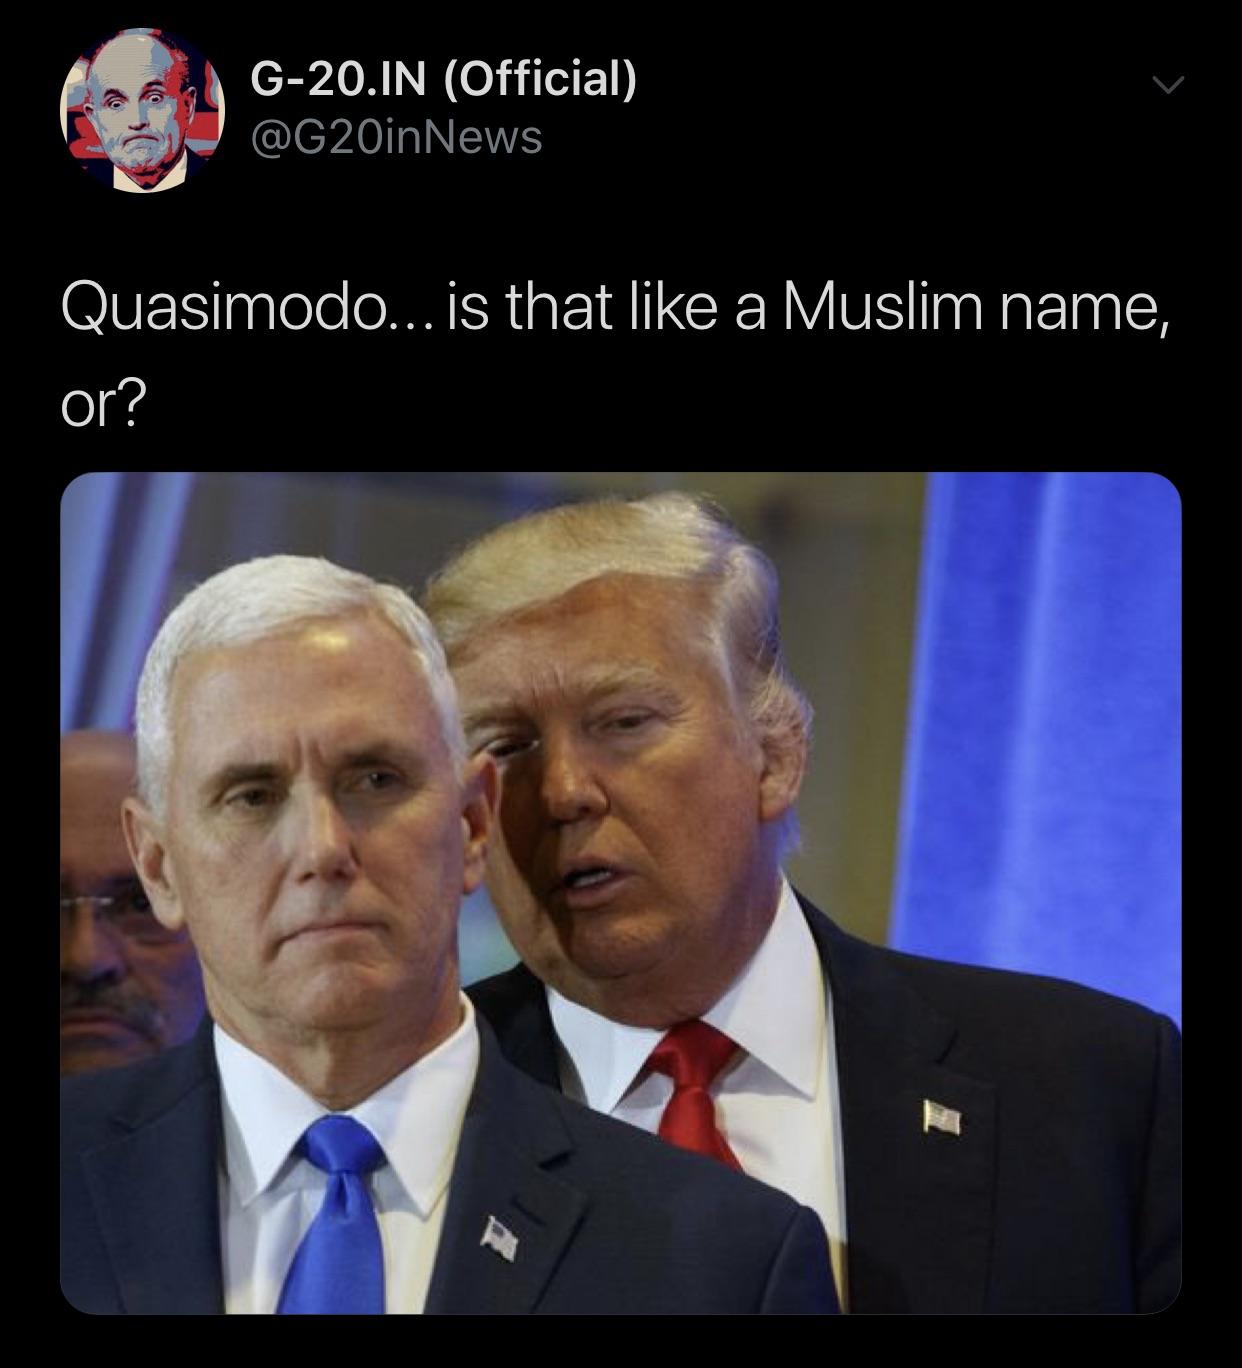 mike pence as president - G20.In Official Quasimodo... is that a Muslim name, or?